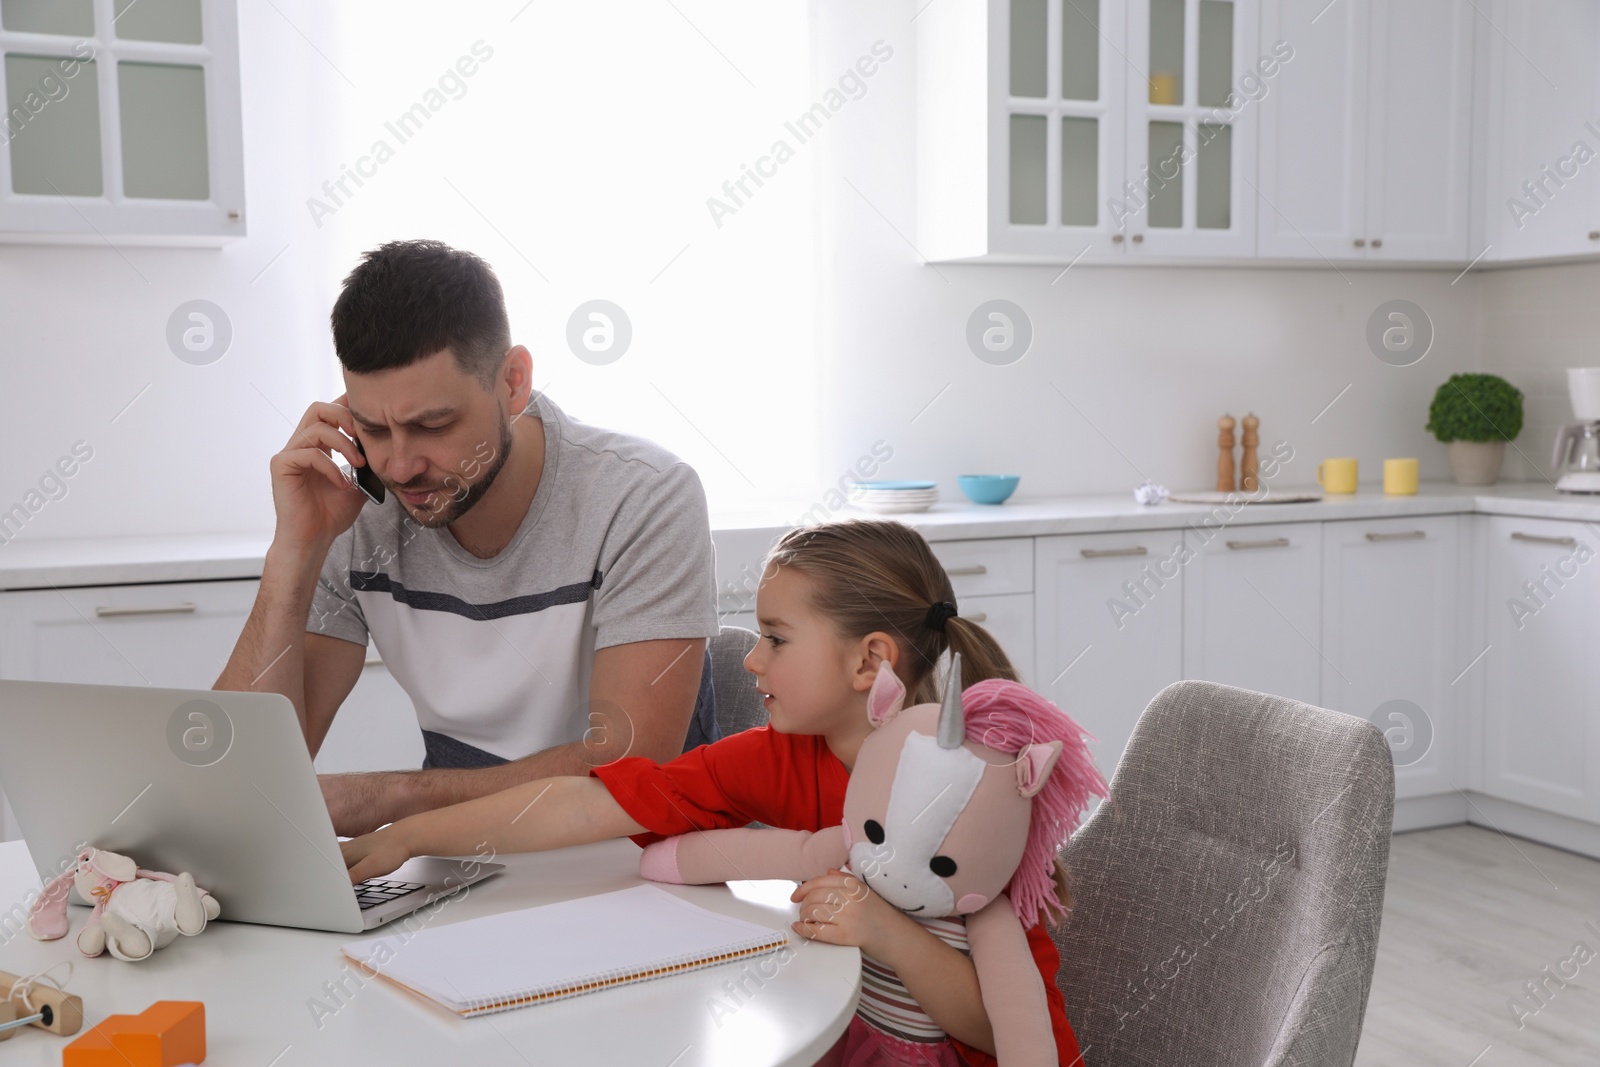 Photo of Cute child disturbing stressed man in kitchen. Working from home during quarantine